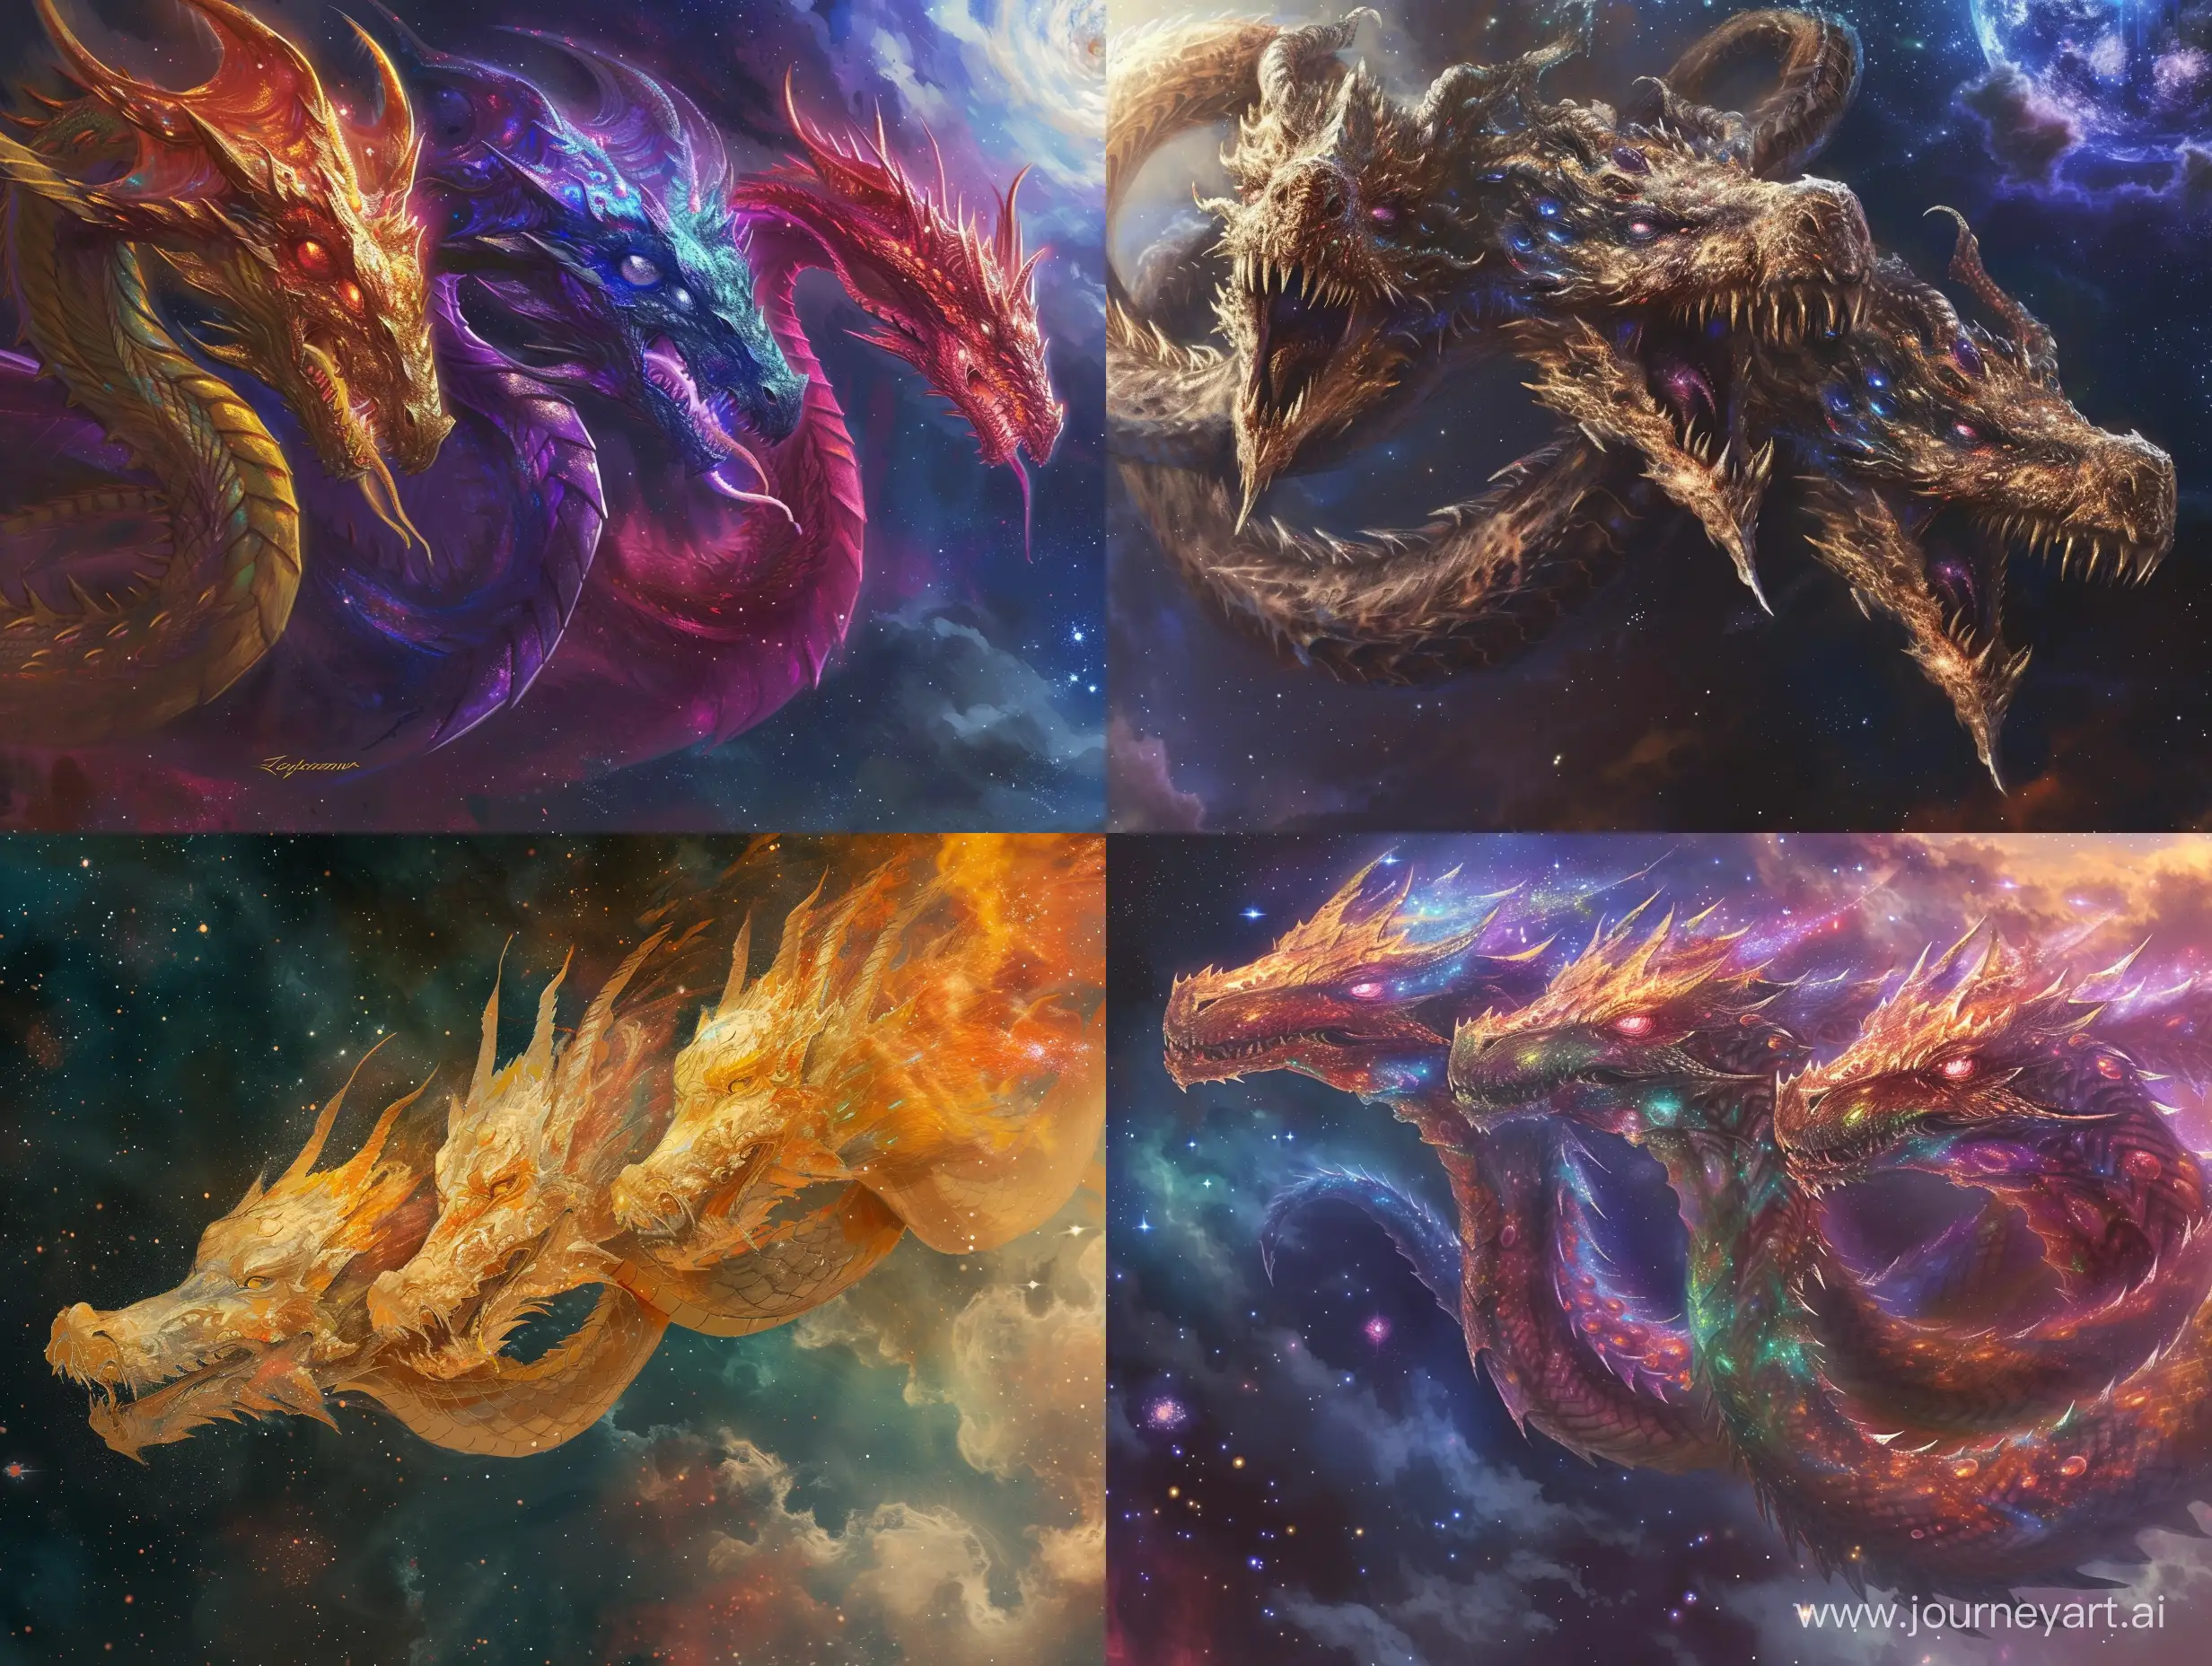 Majestic-ThreeHeaded-Cosmos-Dragon-Art-with-6-Variations-in-a-43-Aspect-Ratio